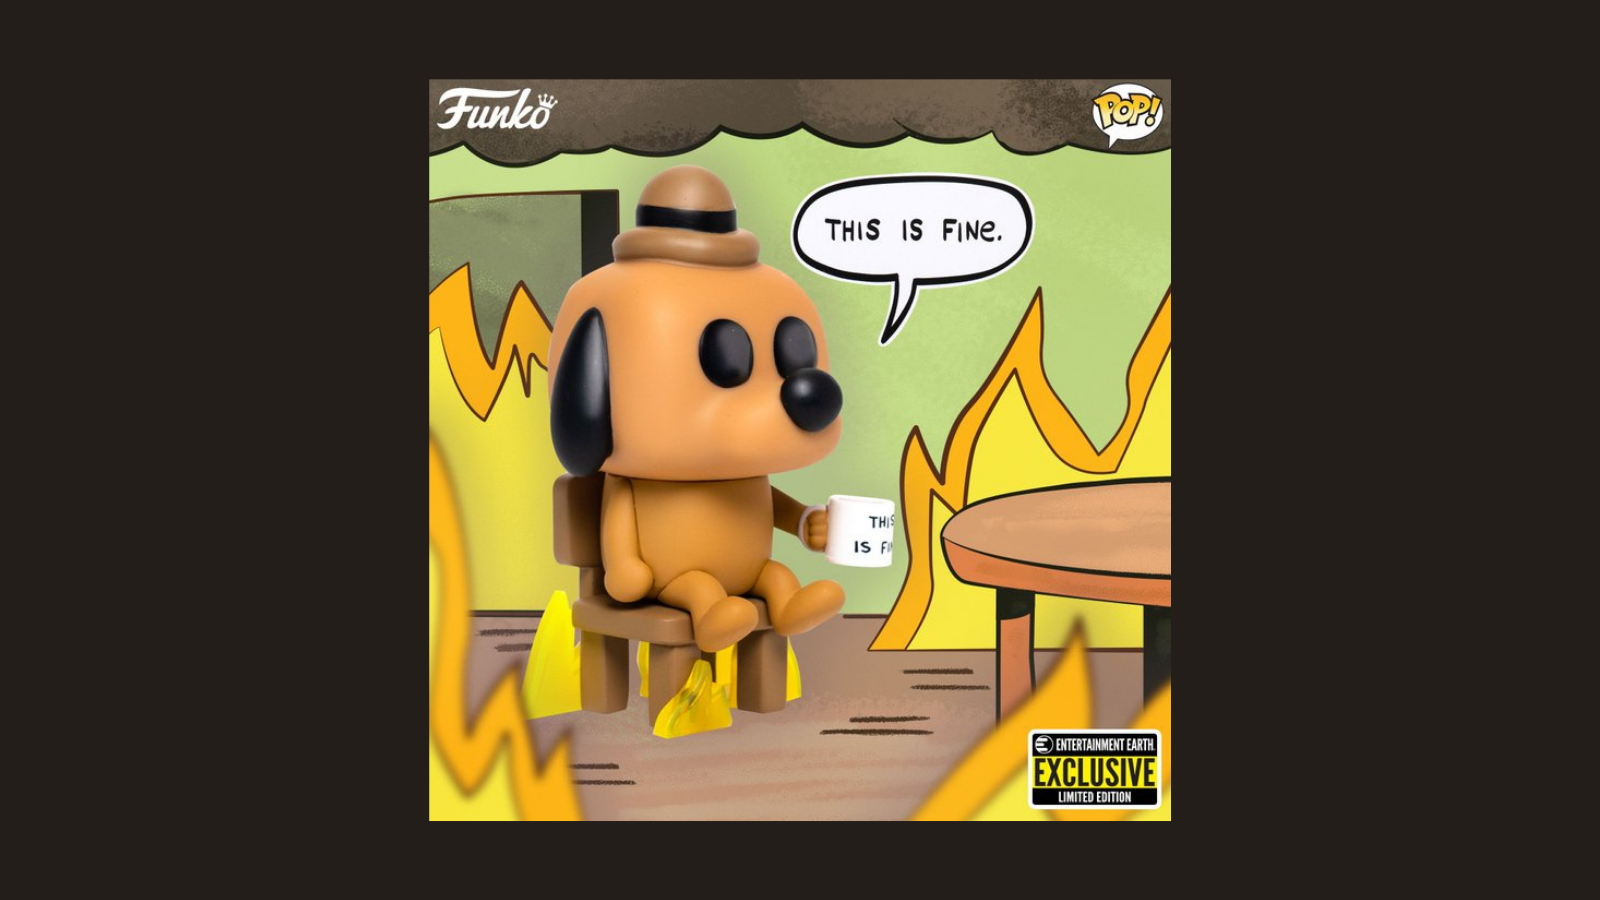 'THIS IS FINE' DOG FUNKO POP! BRINGS THE 2020 FEELS - Z93